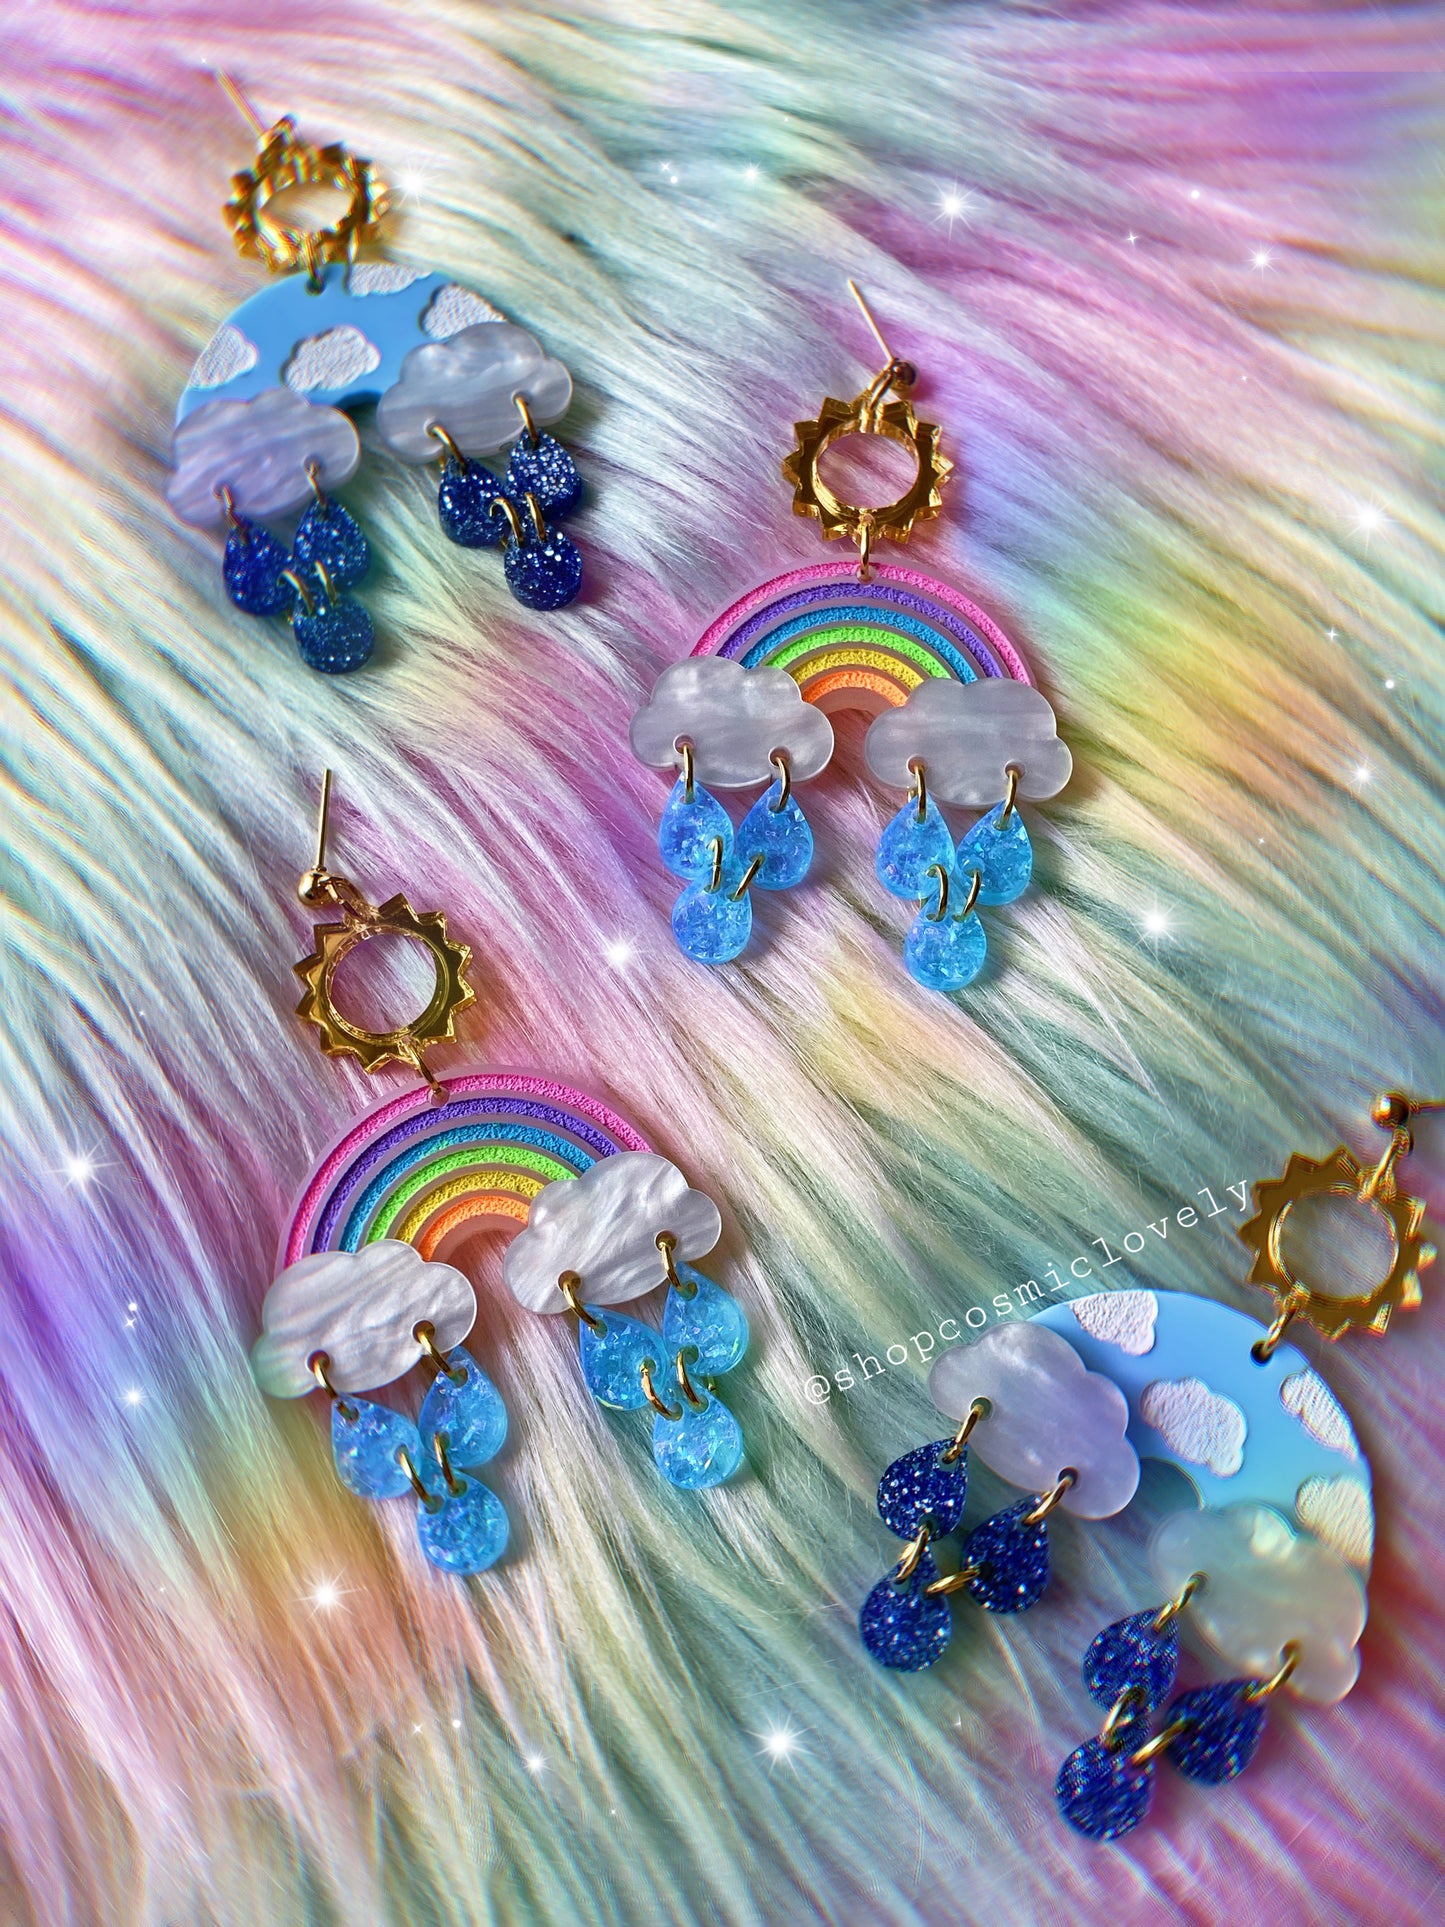 In the Clouds Rainbow Earrings